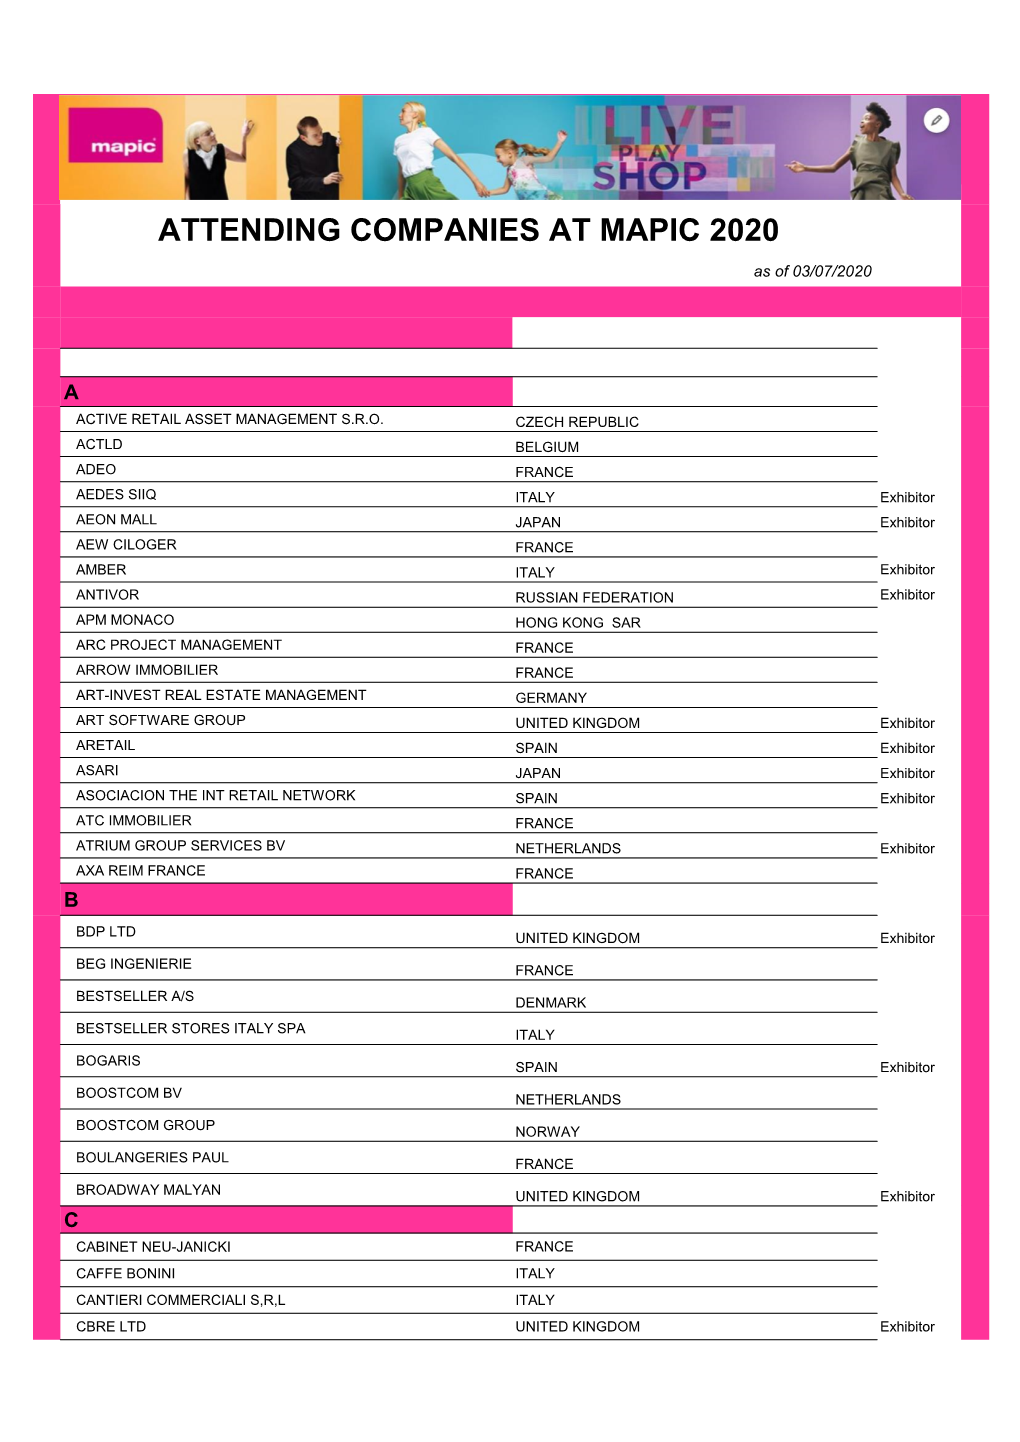 ATTENDING COMPANIES at MAPIC 2020 As of 03/07/2020